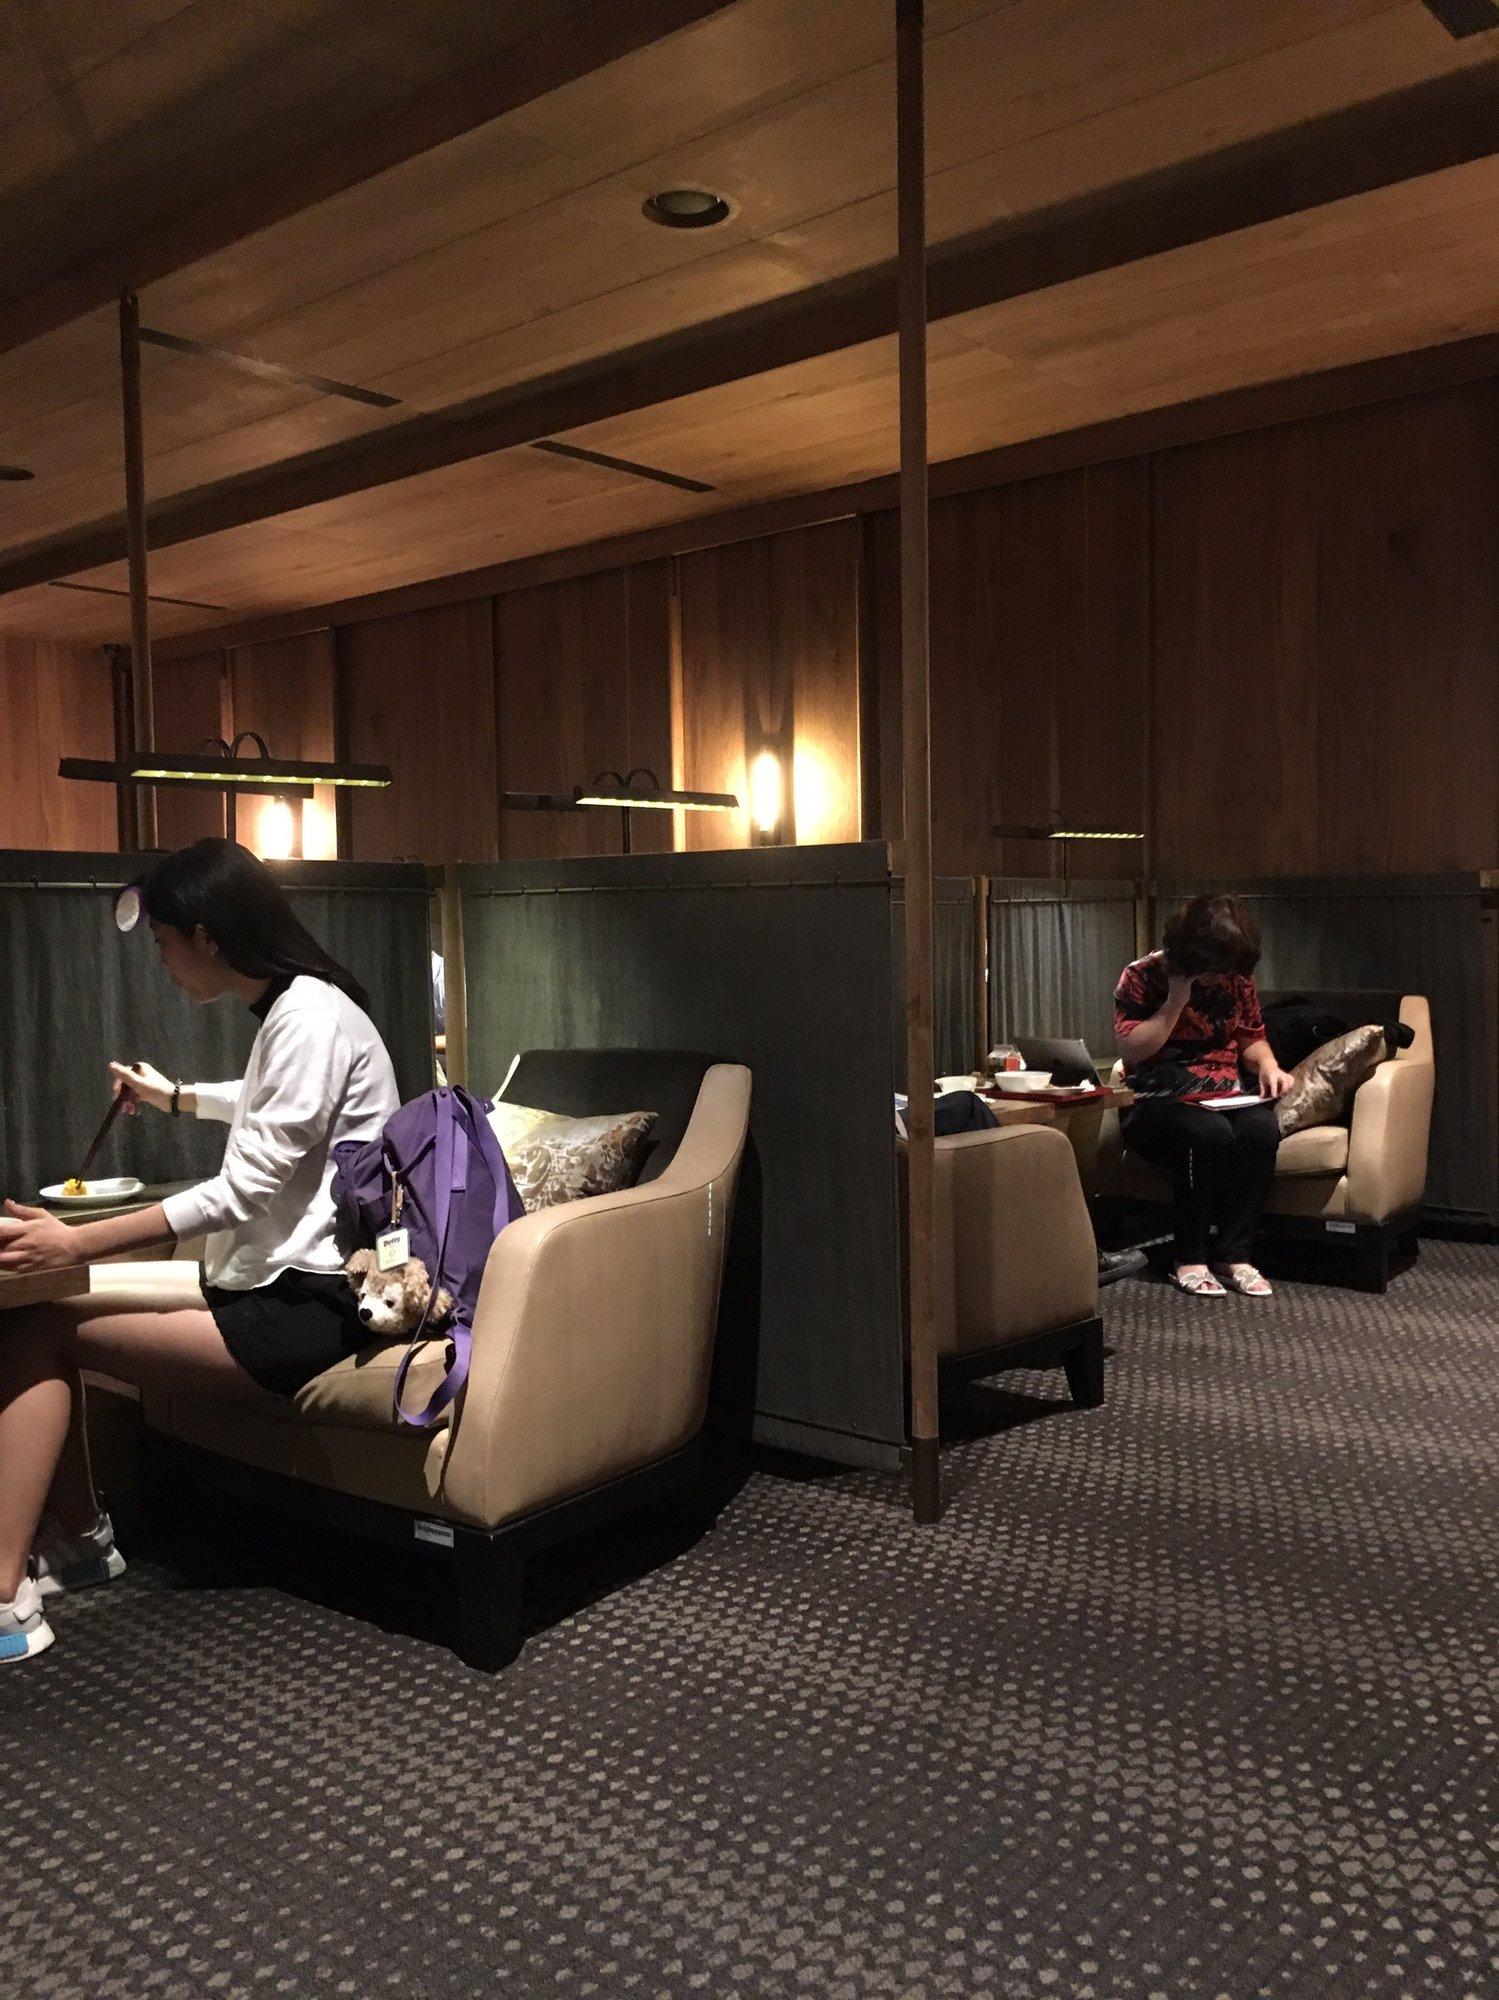 China Airlines Lounge (V1) image 37 of 44